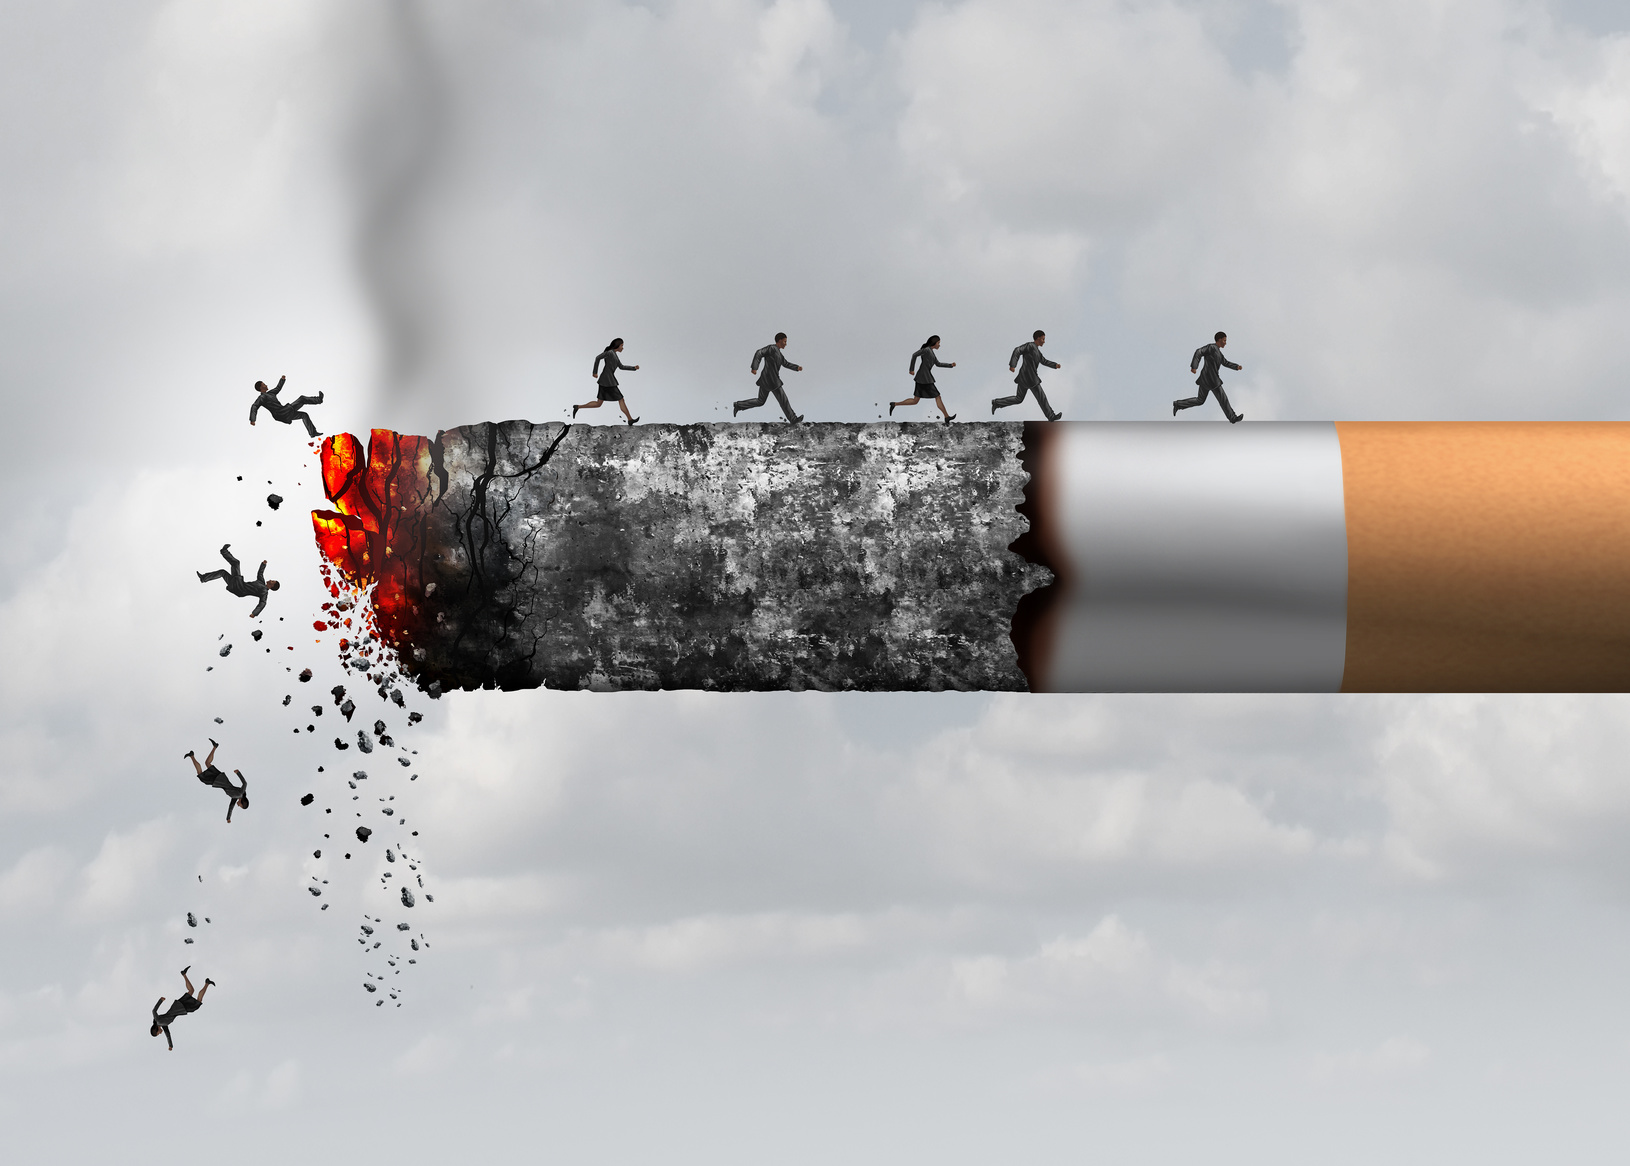 Smoking death and danger concept as a cigarette burning with people falling and escaping the hot burning ash as a metaphor for toxic smoke exposure causing lung cancer and lethal health risks with 3D illustration elements.